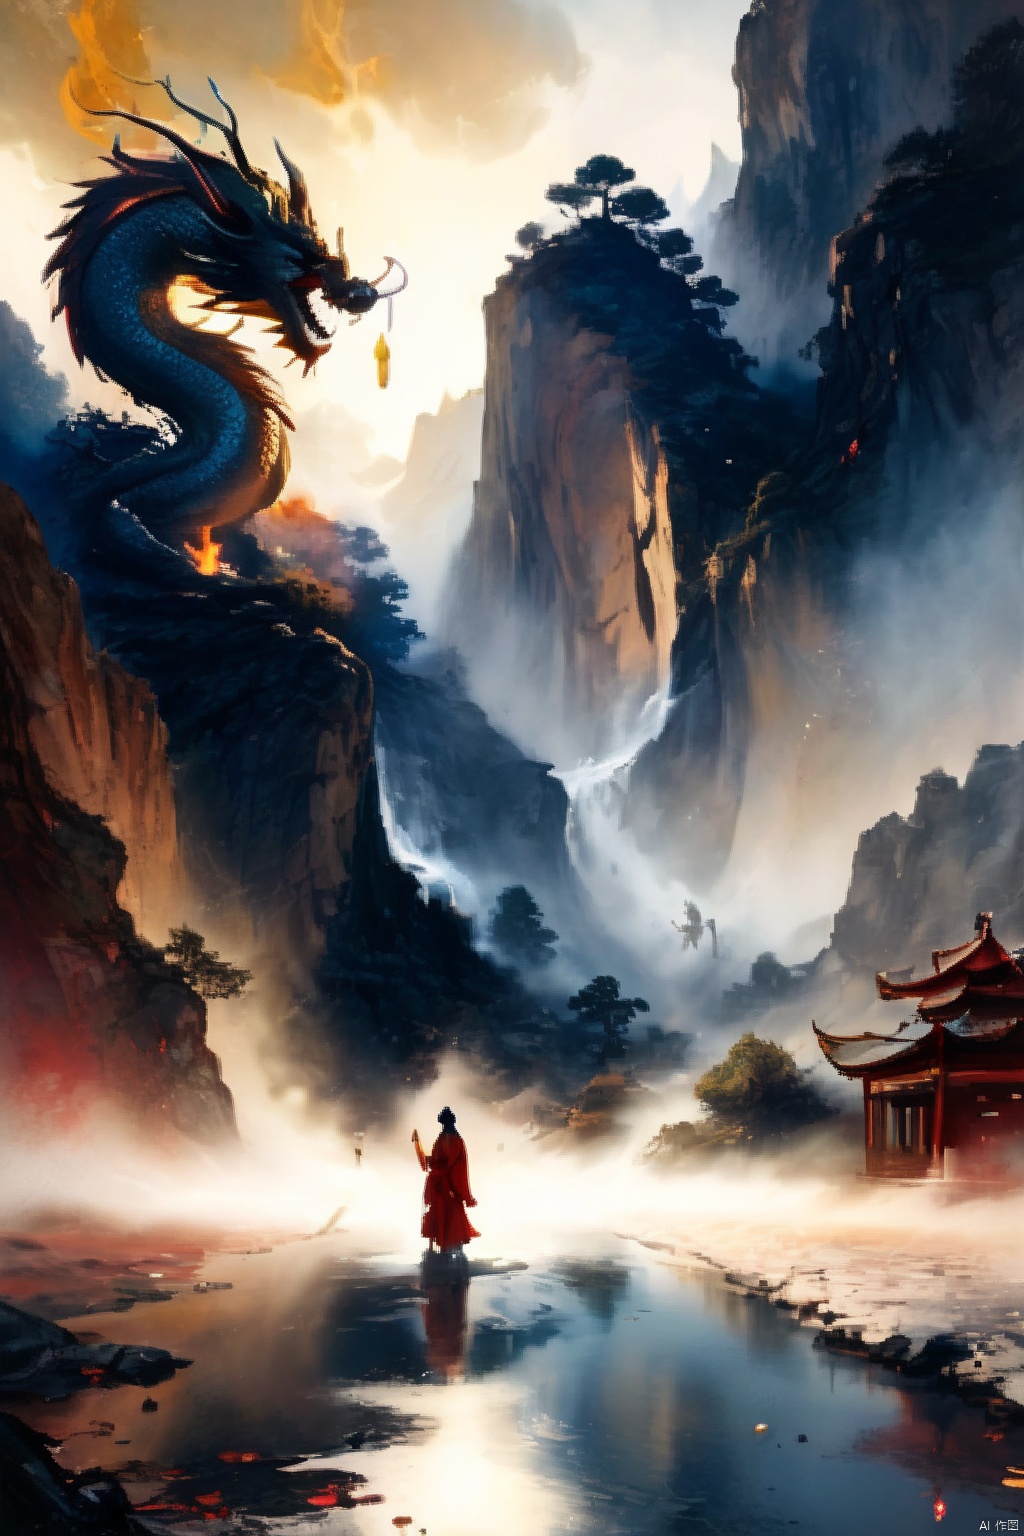  ((1 giant Chinese dragon girl:1.5))，(the dragon girl as tall as a mountain:1.3) peakUltra-wide-angle,Chinese Jin Yong's martial arts style，Golden Dragon，((Chinese Dragon girl:1.4)),Black long hair，Long legs，Red Cape，(Holding the Flame Sword:1.2)，((the dragon girl Standing on the winding road at the bottom of the canyon:1.3))，Golden Dragon Horn，Dragon tail，in a new character that embodies elements of both, chains, and silver mechanical gears in the background, people, see.The scene is grand and desolate， Black and white, ink Flow - 8k Resolution Photorealistic Masterpiece - by Aaron Horkey and Jeremy Mann - Intricately Detailed. fluid gouache painting: by Jean Baptiste Mongue: calligraphy: acrylic: colorful watercolor, cinematic lighting, maximalist photoillustration: by marton bobzert: 8k resolution concept art, intricately detailed realism, complex, elegant, expansive, fantastical and psychedelic, dripping paint , In the cracks on both sides of the canyon , night, the moon, buildings, reflections, wings, and other elements need to stay in frame,(isolate object), backlight，The cloud is a blurry palace，(Clouds cover part of the palace:1.3), (Detailed reflection
of the girl:1.5)，There are gravel in the canyon and the roads are rugged，Girl's long hair fluttering，(This girl is extremely tall:1.4)